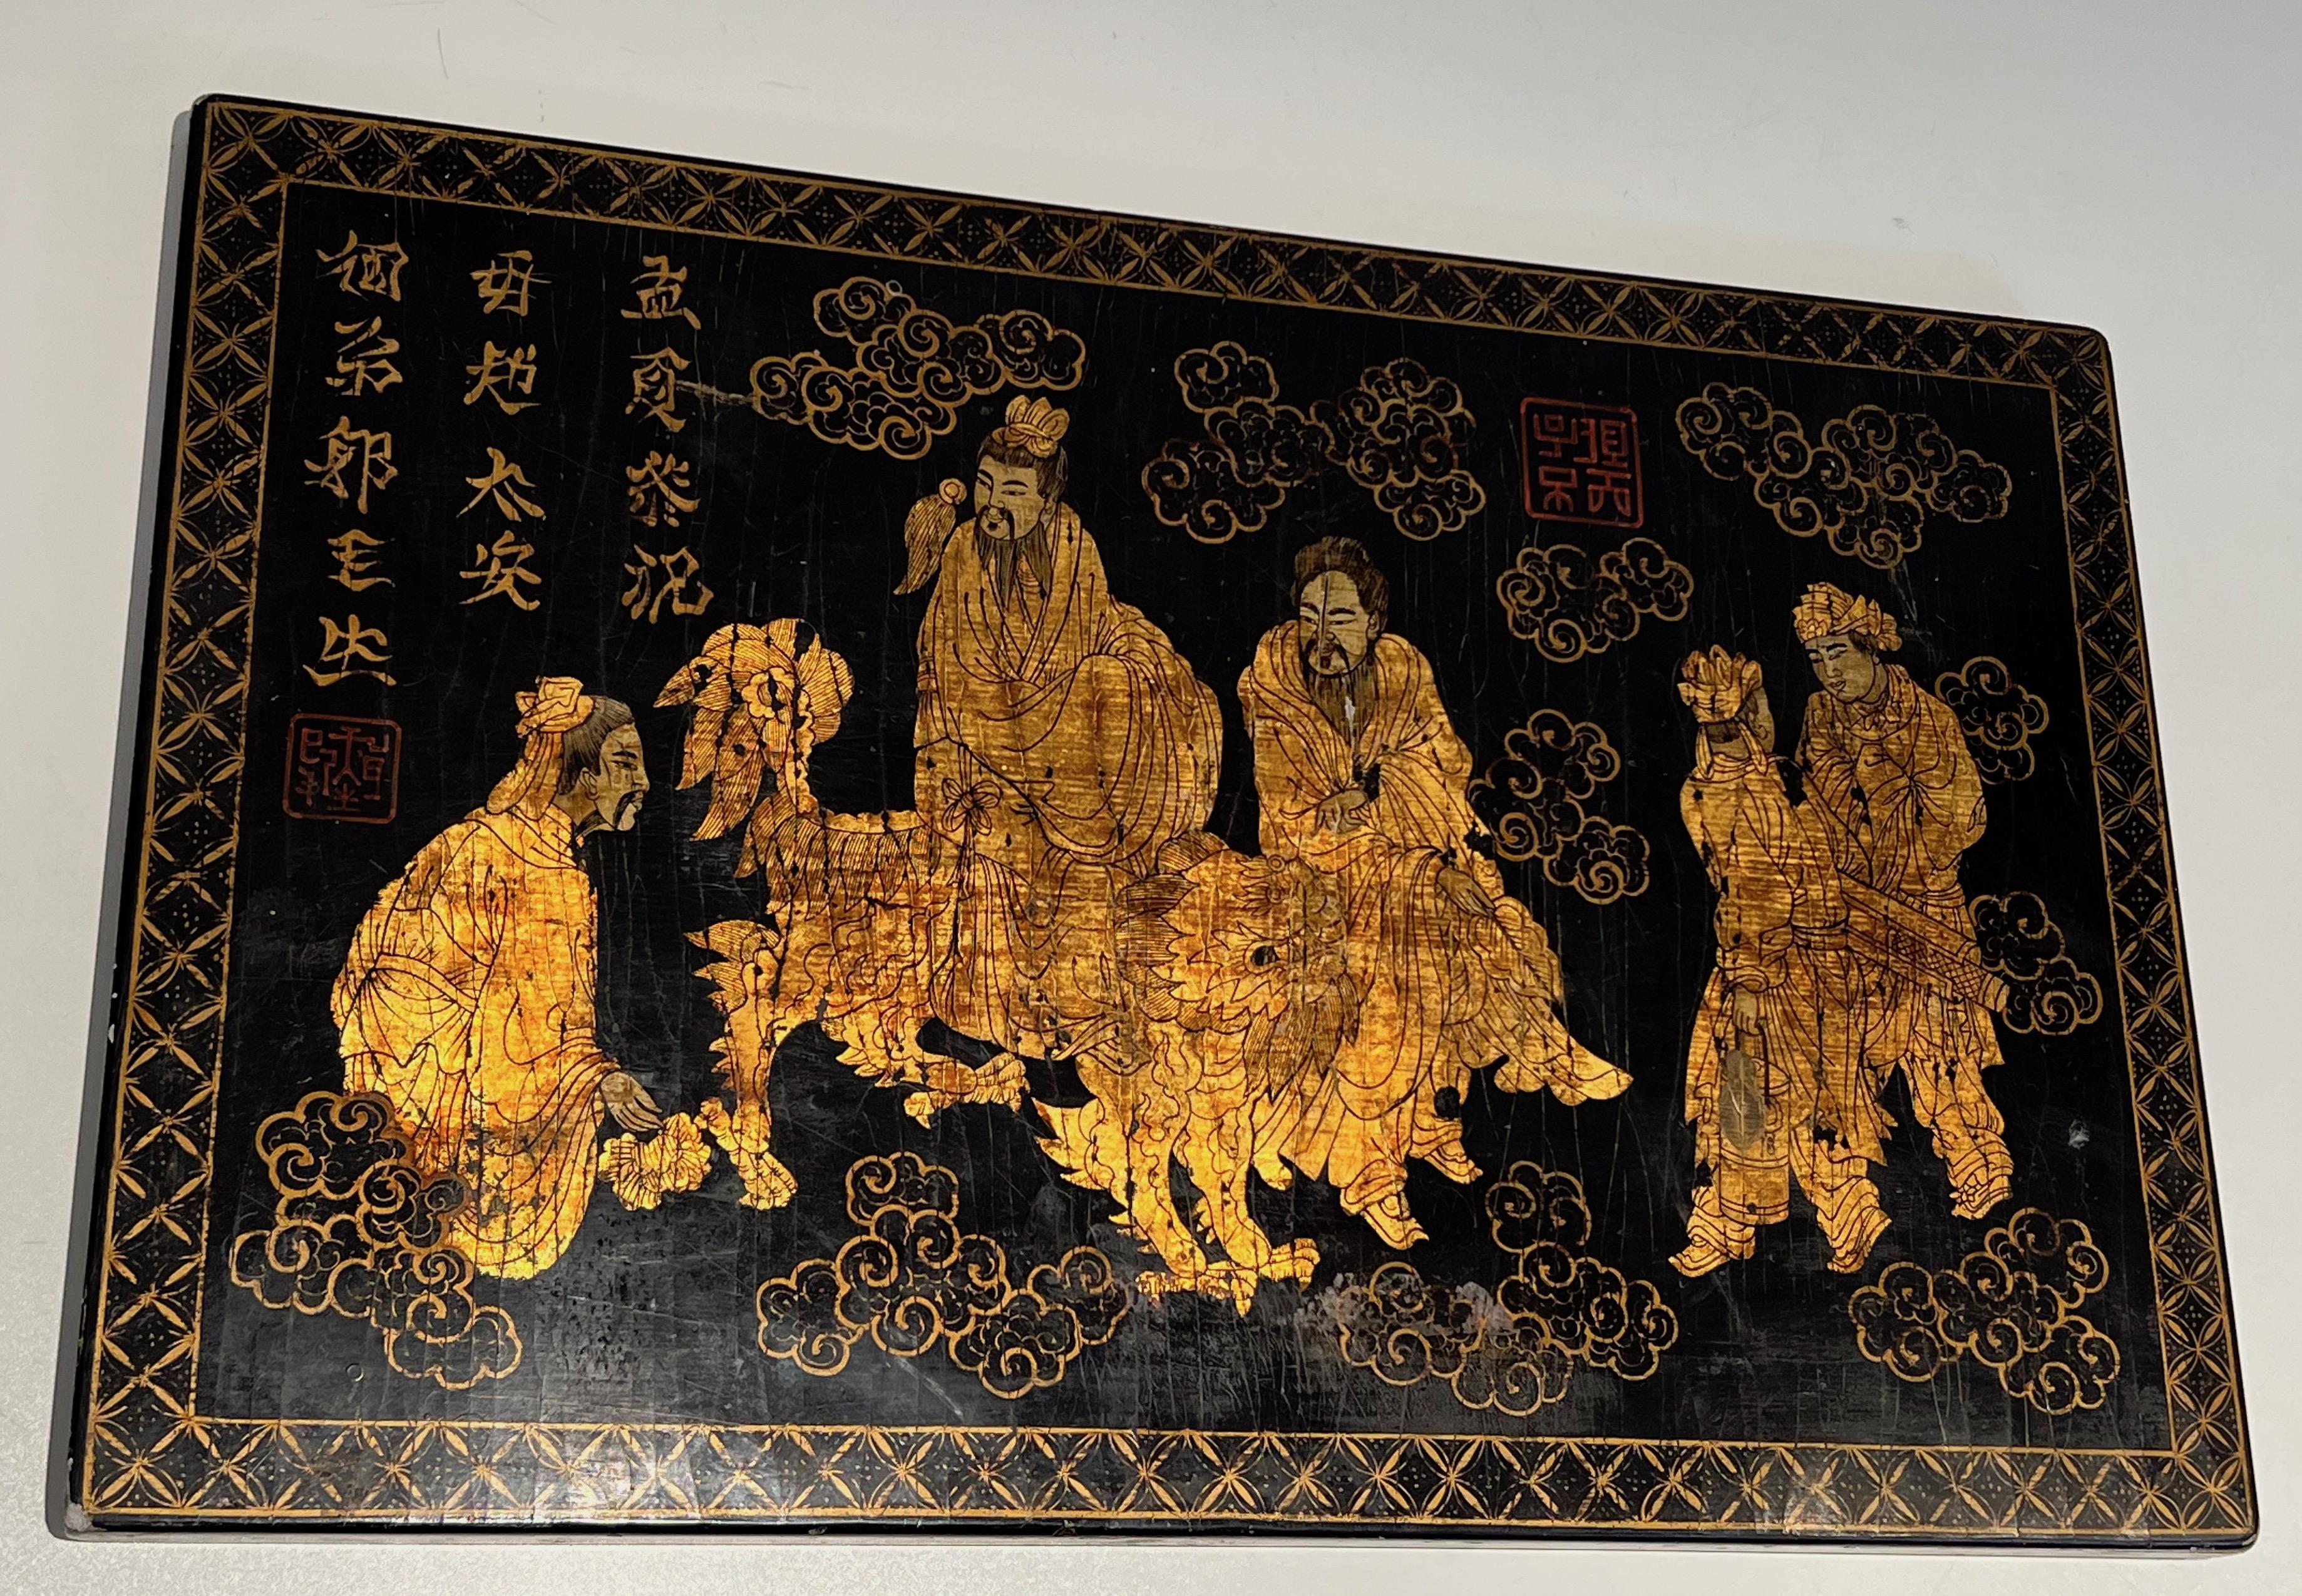 This beautiful lacquered and gilding painting has been made on a wooden panel. The painting represents Chinese characters, one of them riding a dragon. The scene is surrounded by stylized floral motifs and Chinese inscriptions. This is a French